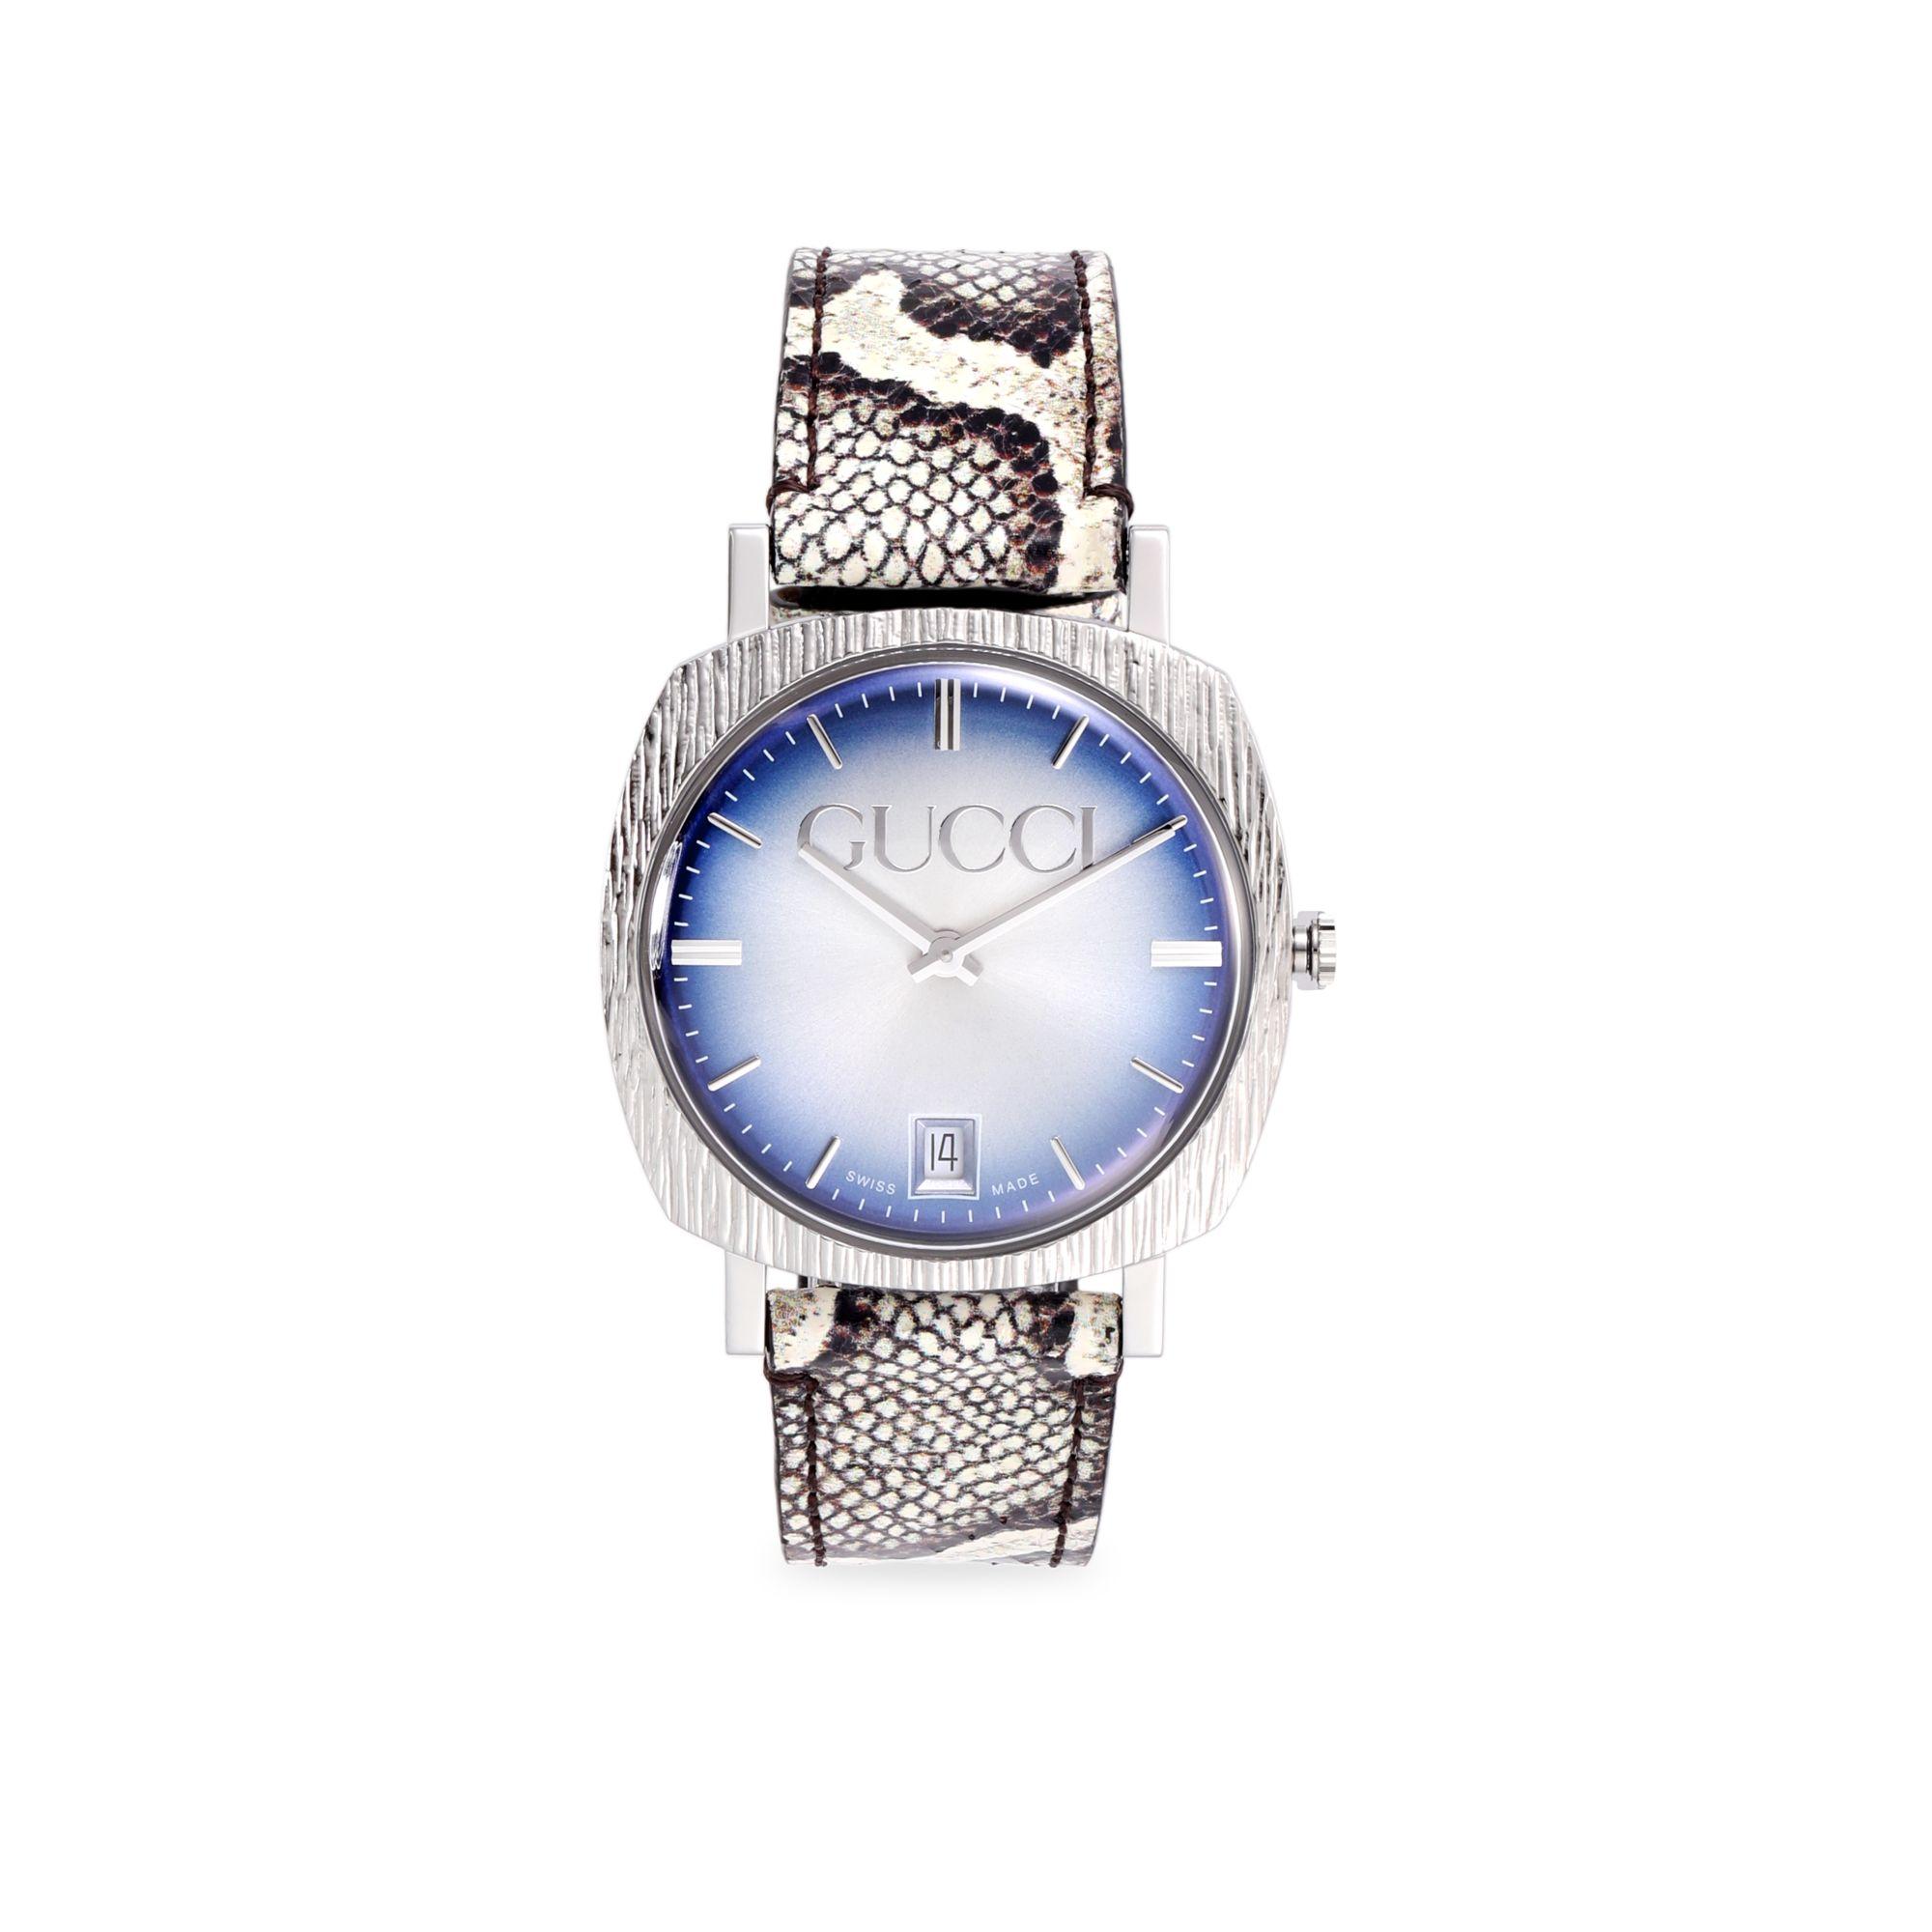 Gucci Stainless Steel & Snakeskin Leather Strap Watch in Blue - Lyst